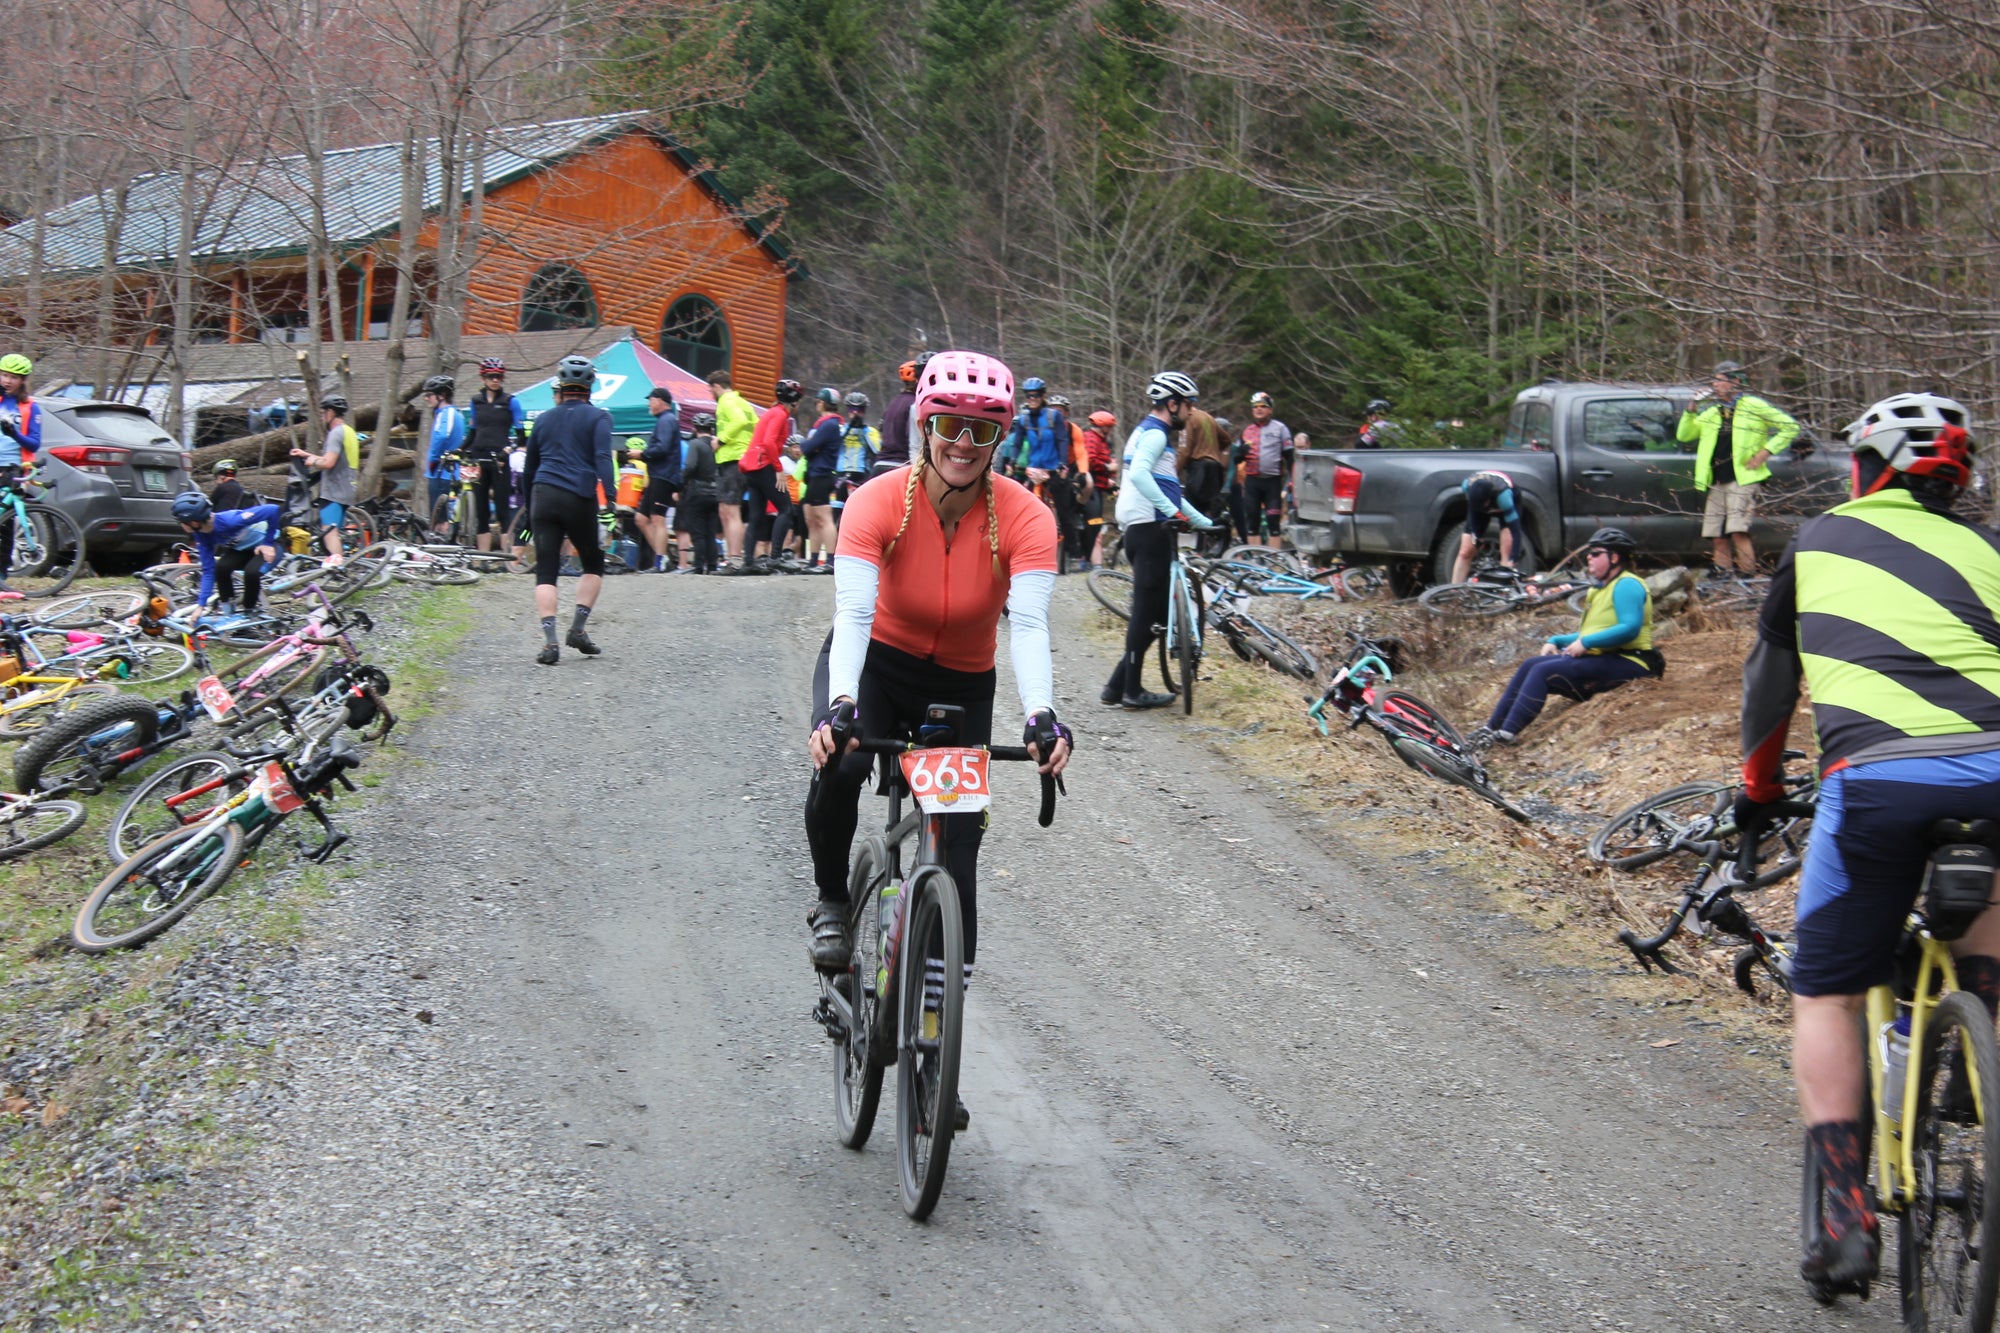 A cyclist in an orange jersey riding down a dirt driveway away from a group of people